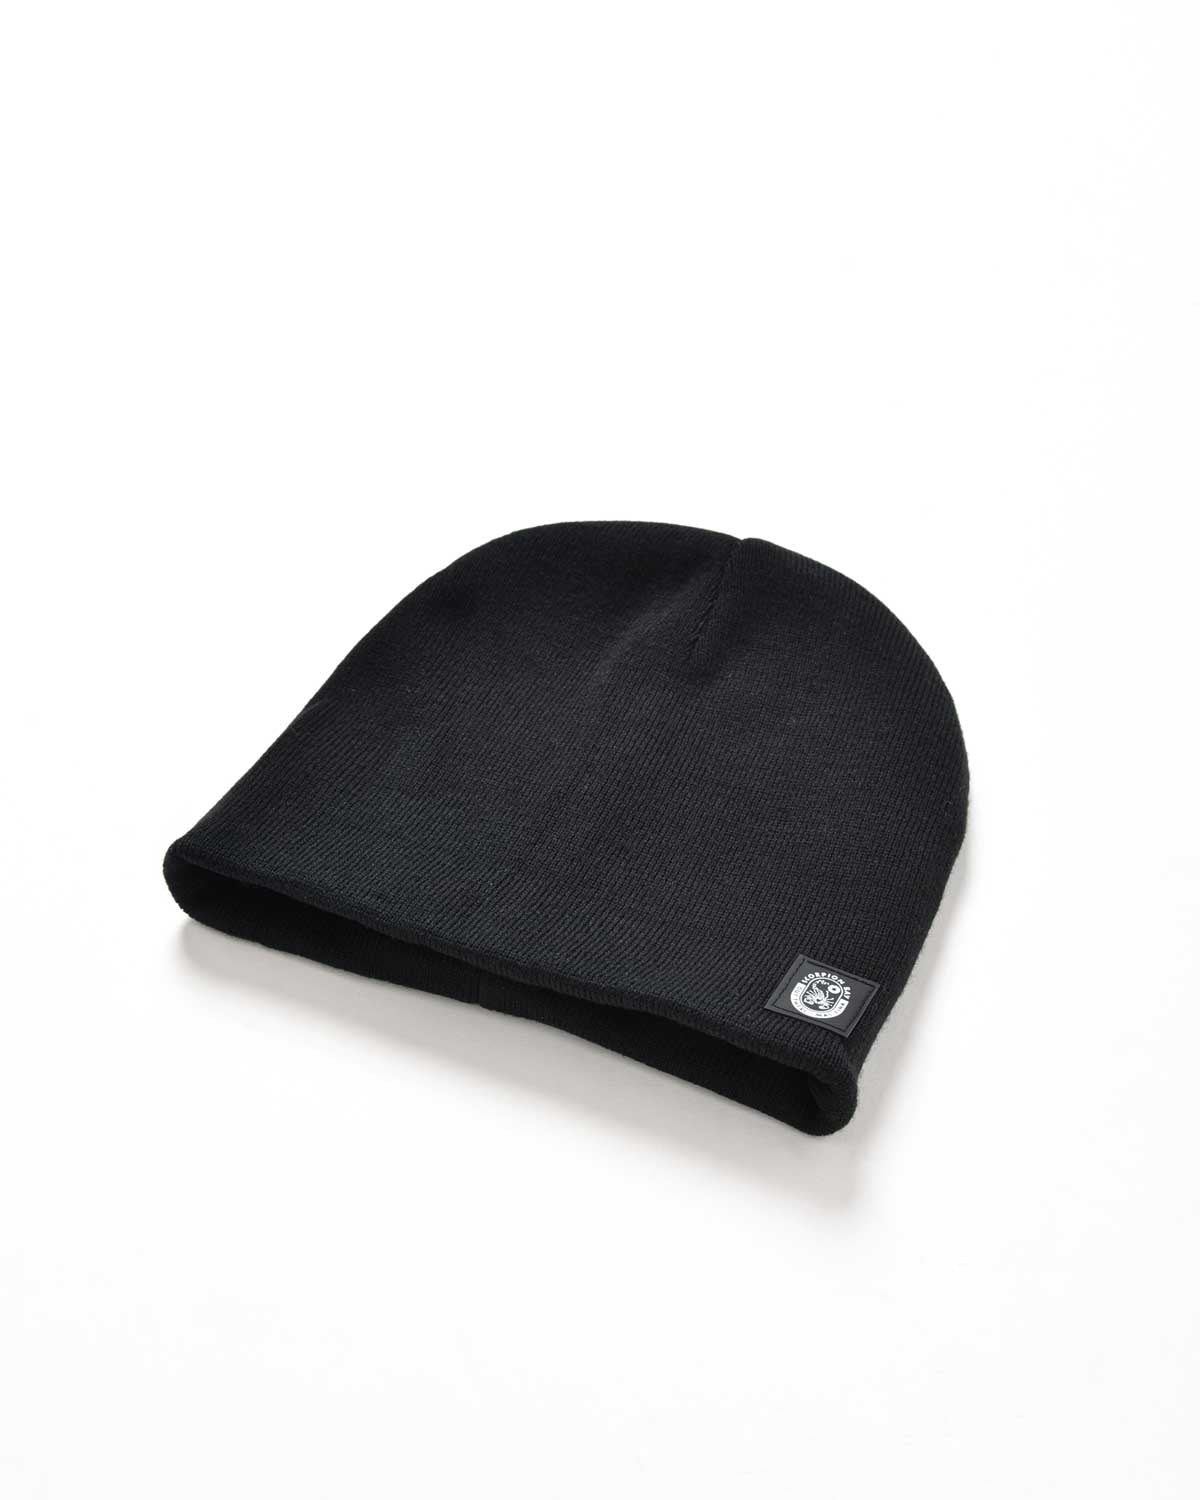 Doubleface Scorpion Black Knitted Beanie